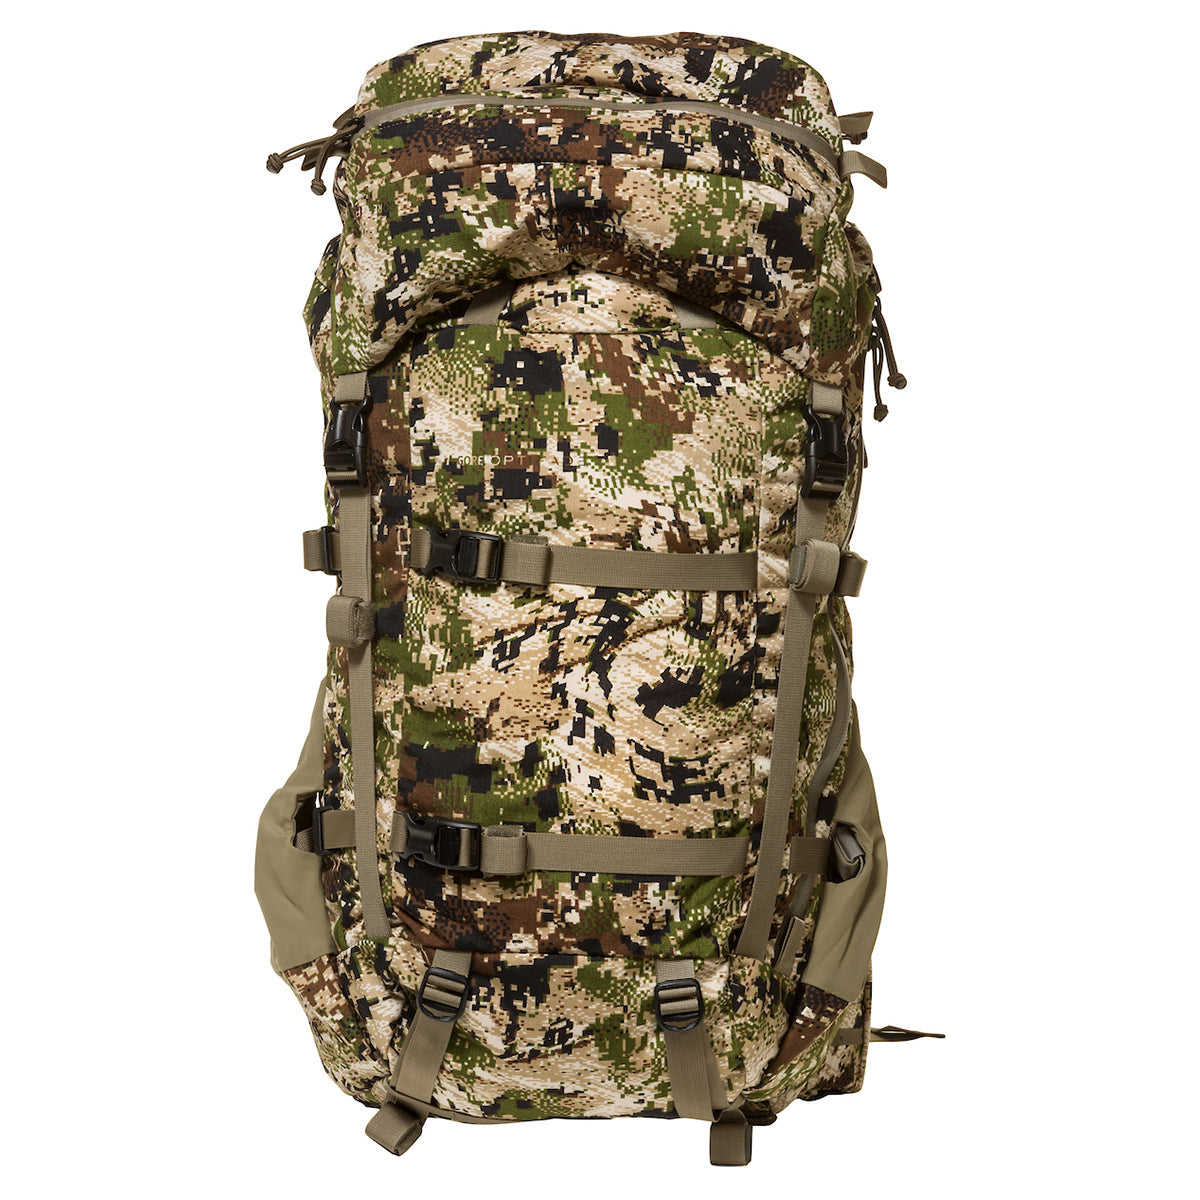 Mystery Ranch Metcalf Backpack in Mystery Ranch Metcalf Backpack (2020) by Mystery Ranch | Gear - goHUNT Shop by GOHUNT | Mystery Ranch - GOHUNT Shop